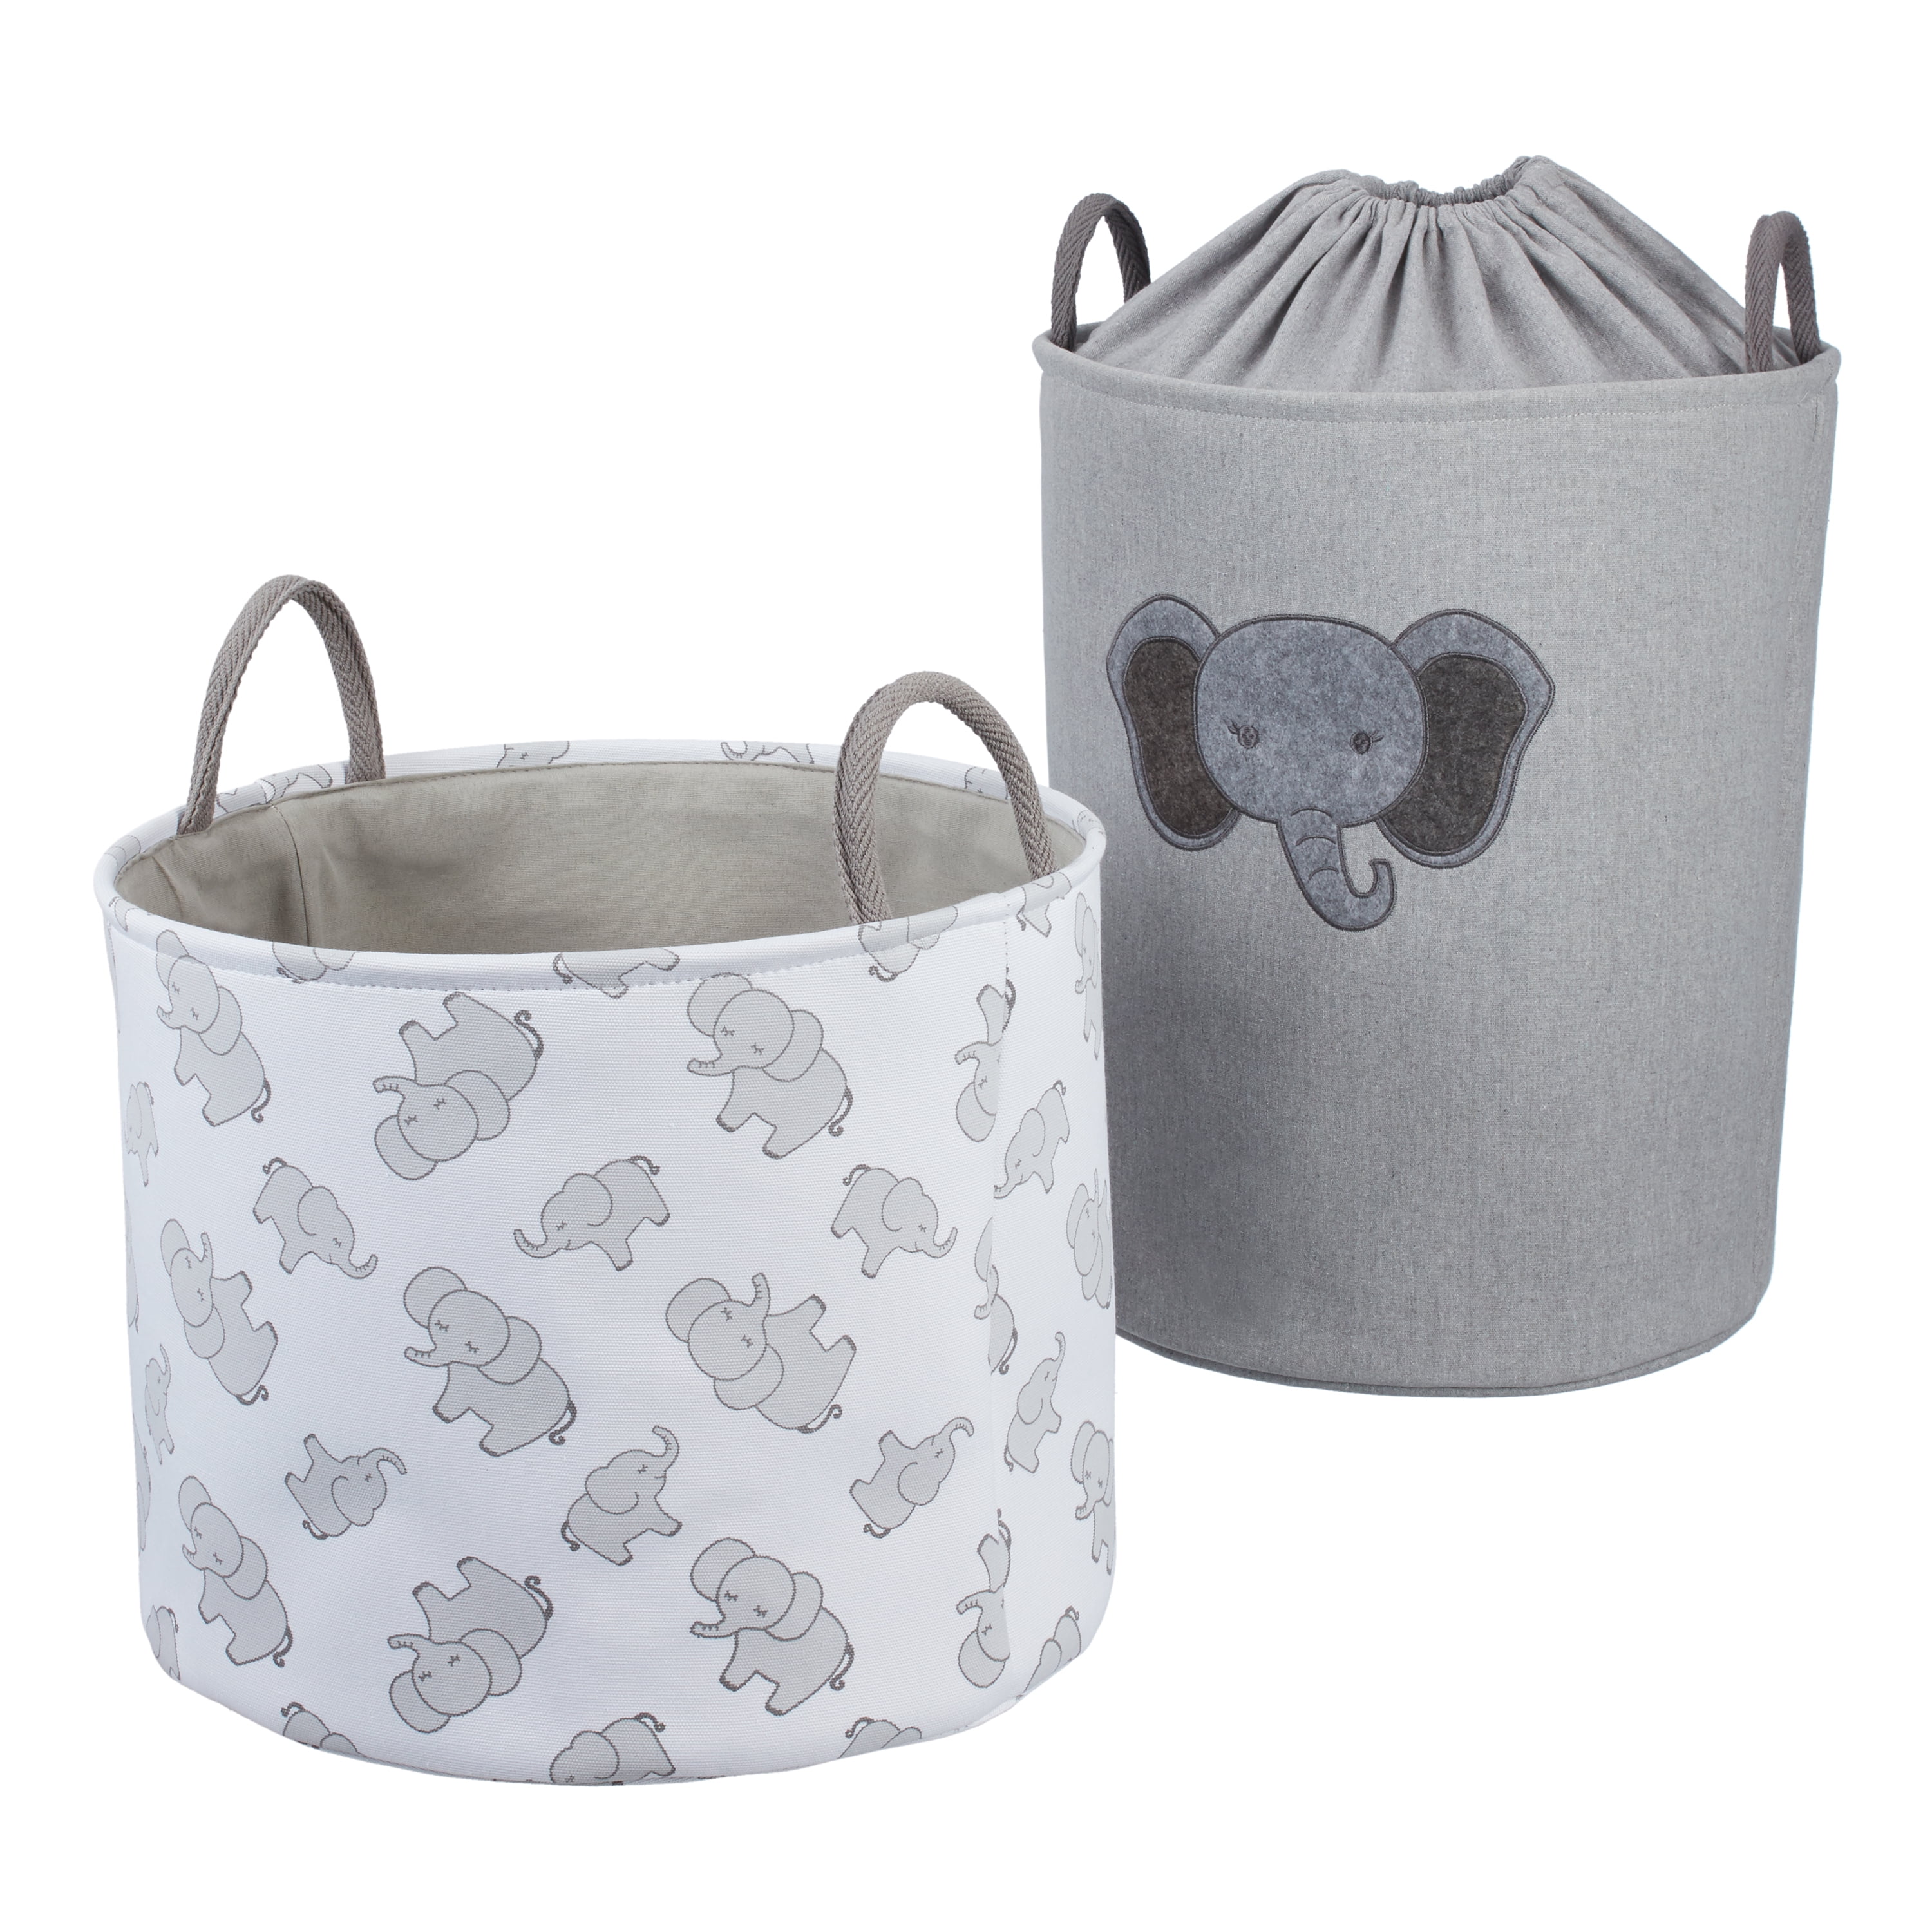 ACMUUNI 19.7 Round Canvas Large Clothes Basket Laundry Hamper with Handles,Waterproof Cotton Storage Organizer Perfect for Kids Boys Girls Toys Room elephant Bedroom Nursery,Home,Gift Basket